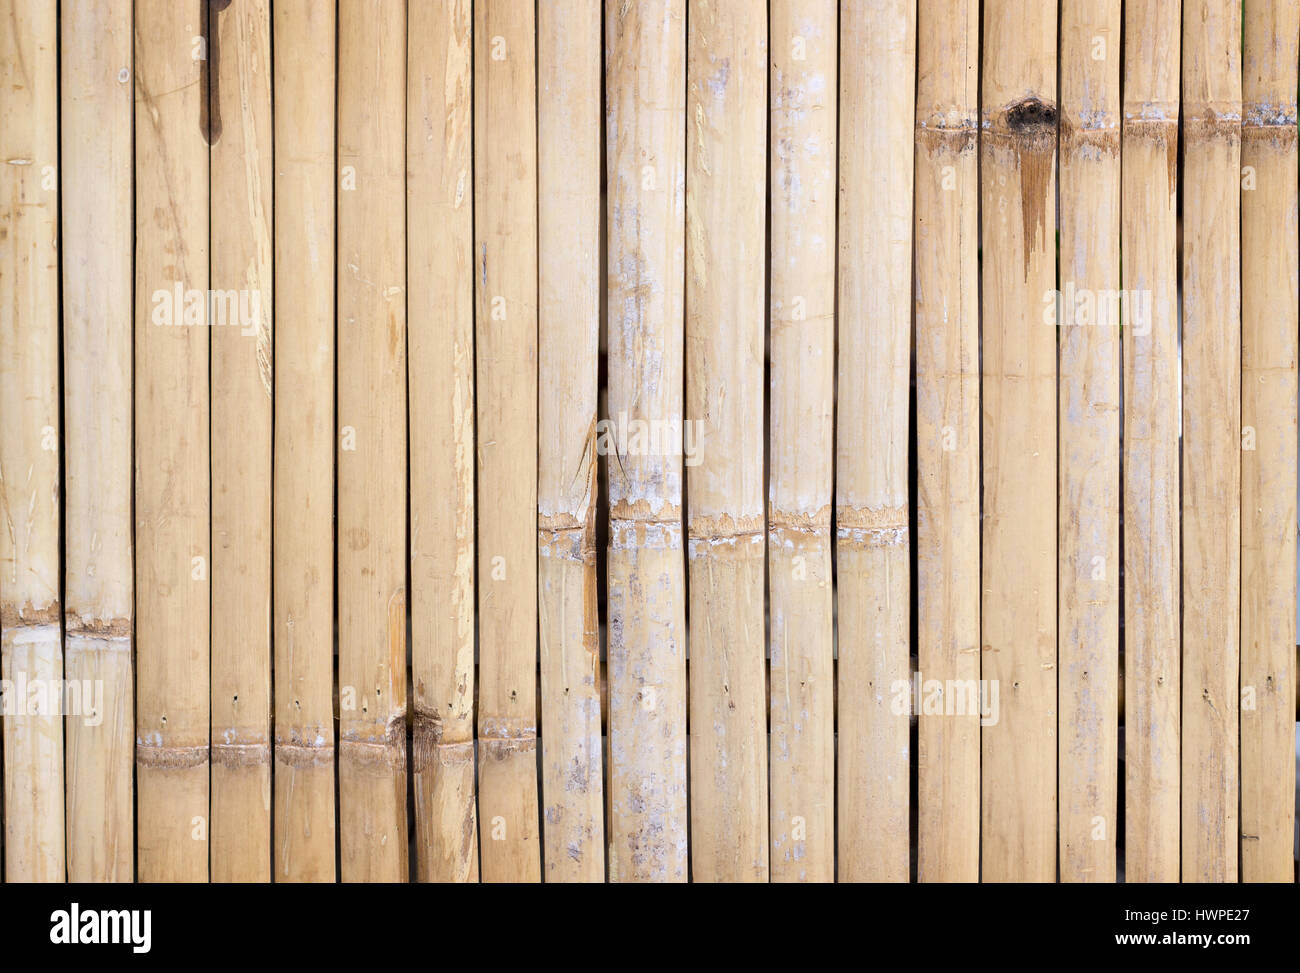 https://c8.alamy.com/comp/HWPE27/bamboo-wood-texture-for-ground-wall-or-blackdrop-HWPE27.jpg